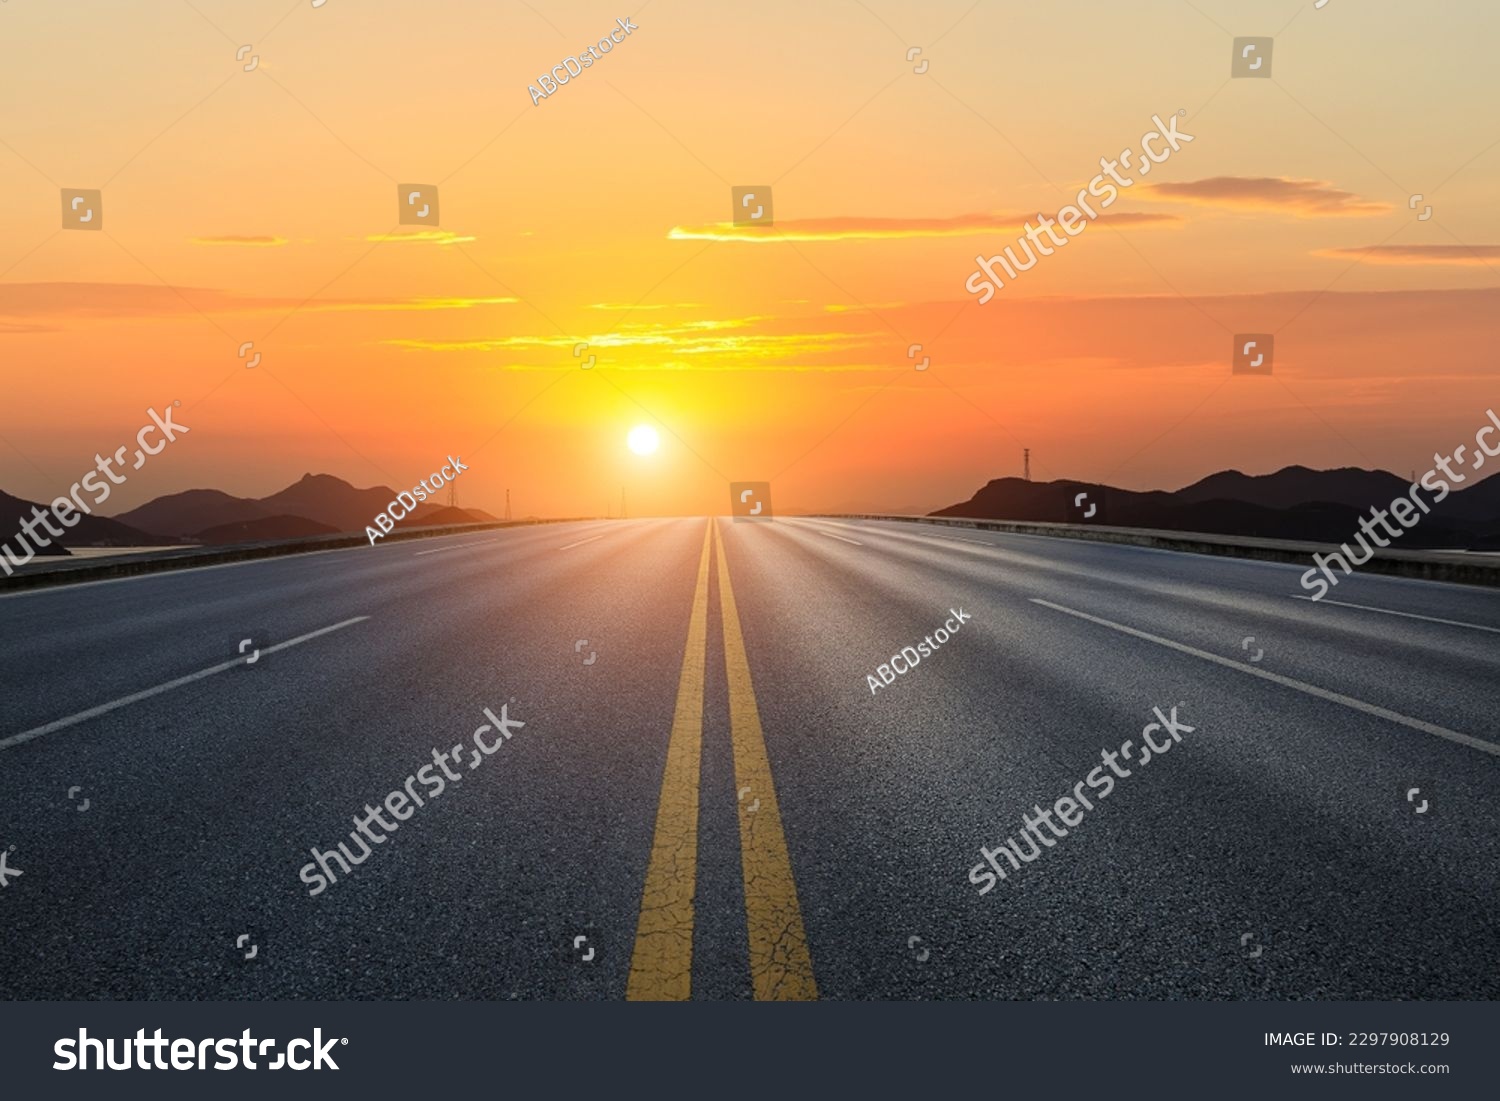 Straight asphalt road and mountain with sky clouds background at sunset #2297908129